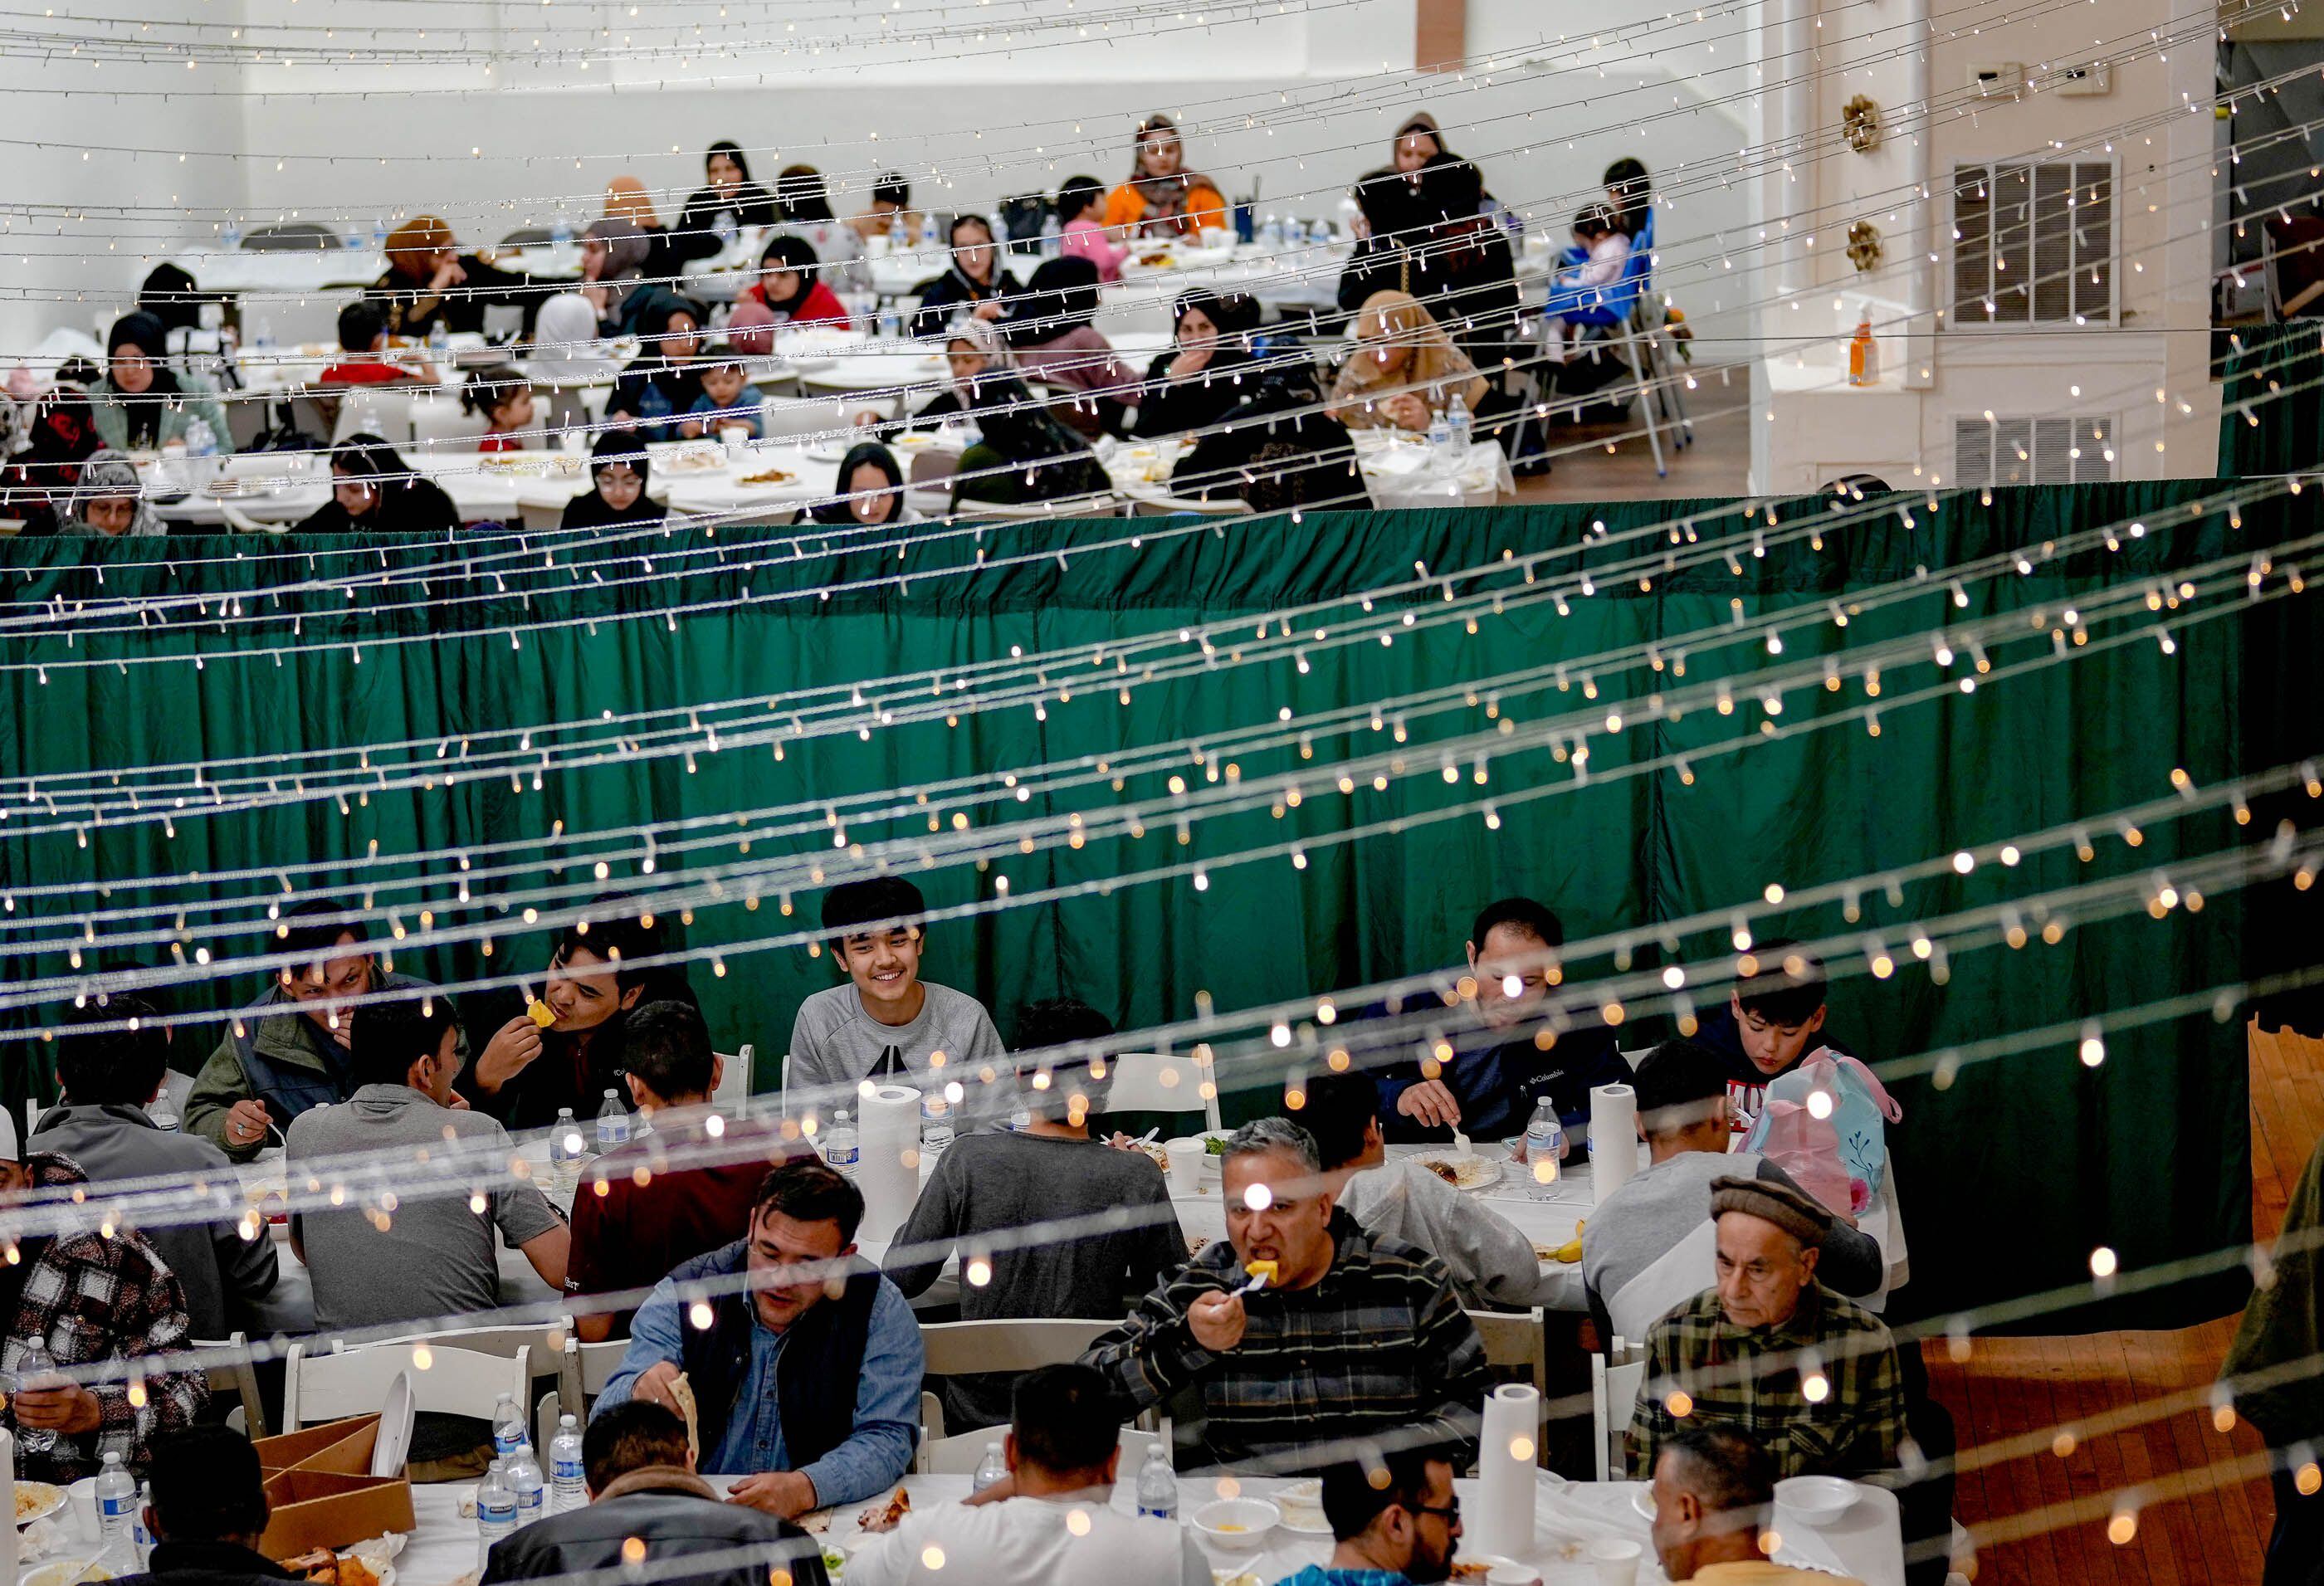 (Francisco Kjolseth | The Salt Lake Tribune) Men, women and children gather for an evening meal in the banquet hall at the Alrasool Islamic Center in Taylorsville during Ramadan, on Friday, March 22, 2024. 